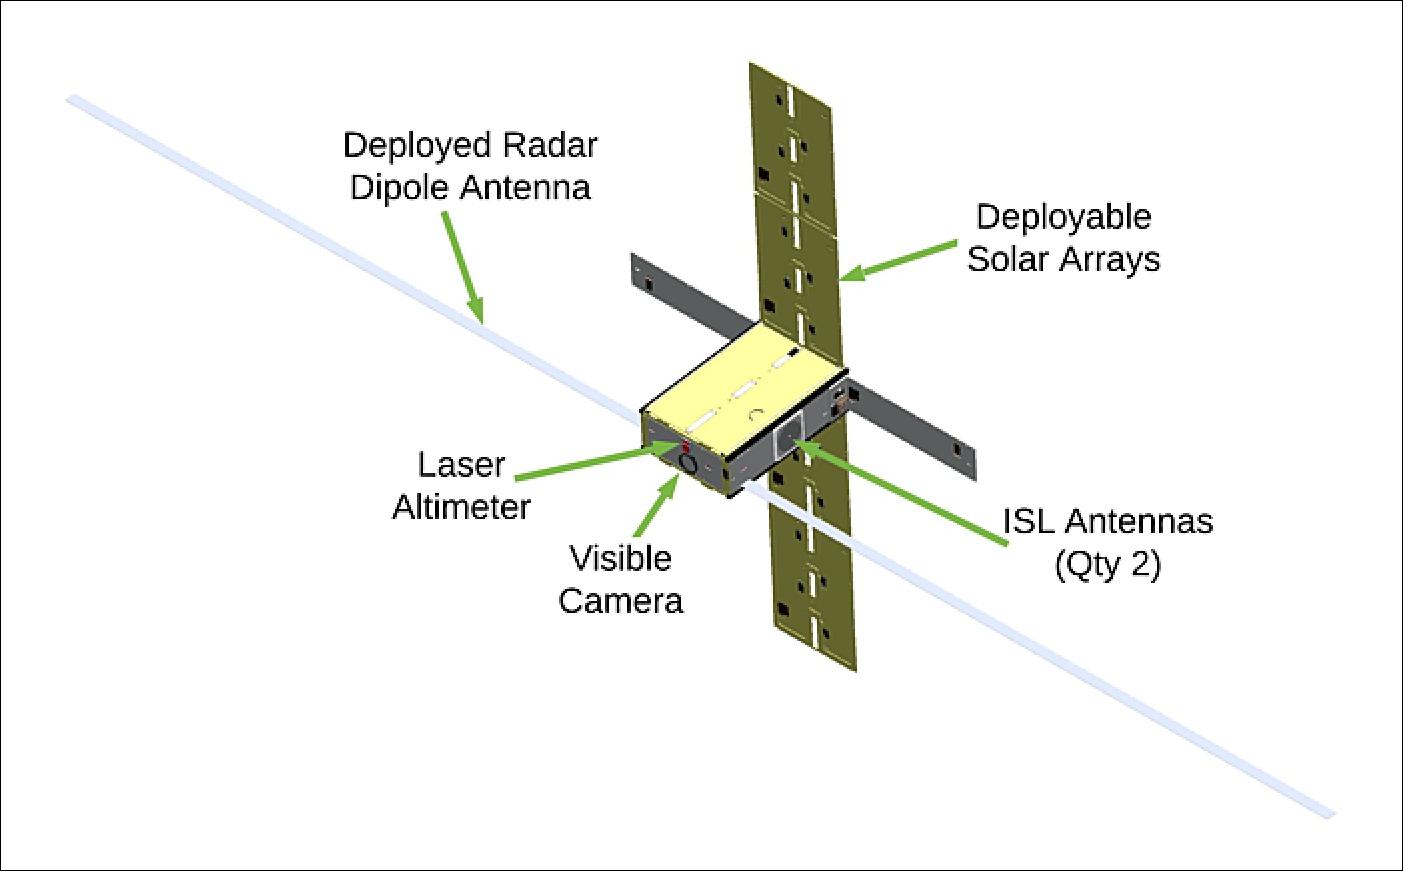 Figure 45: This six-unit CubeSat would fly with ESA's proposed Hera mission to the Didymos binary asteroid system. Juventas will deploy a 1.5 m long low-frequency radar antenna, which will unfurl like a tape measure, to probe deep beneath the asteroids' surfaces. The fine Sun sensors shown in the diagram will help keep Juventas while its inter-satellite link (ISL) radio frequency systems will link it to its Hera mothership (image credit: GomSpace)